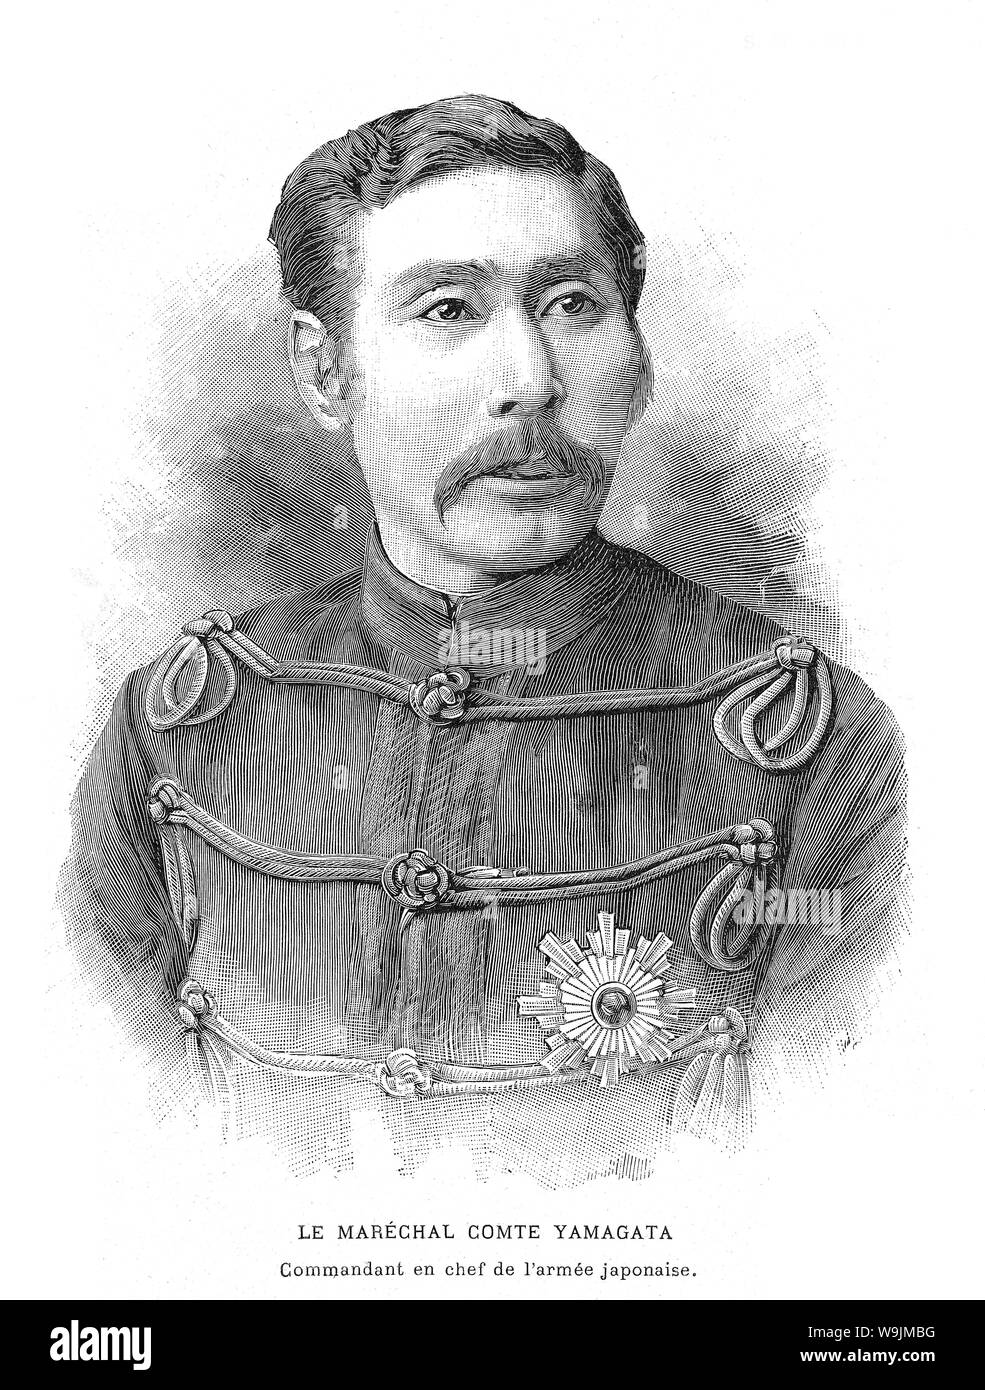 [ 1890s Japan - Japanese Field Marshal Aritomo Yamagata ] —   Aritomo Yamagata (山縣有朋, 1838–1922), was a field marshal in the Imperial Japanese Army and twice Prime Minister of Japan. He is one of the architects of the military and political foundations of early modern Japan.  Published in the French illustrated weekly L'Illustration on September 29, 1894 (Meiji 27).  19th century vintage newspaper illustration. Stock Photo